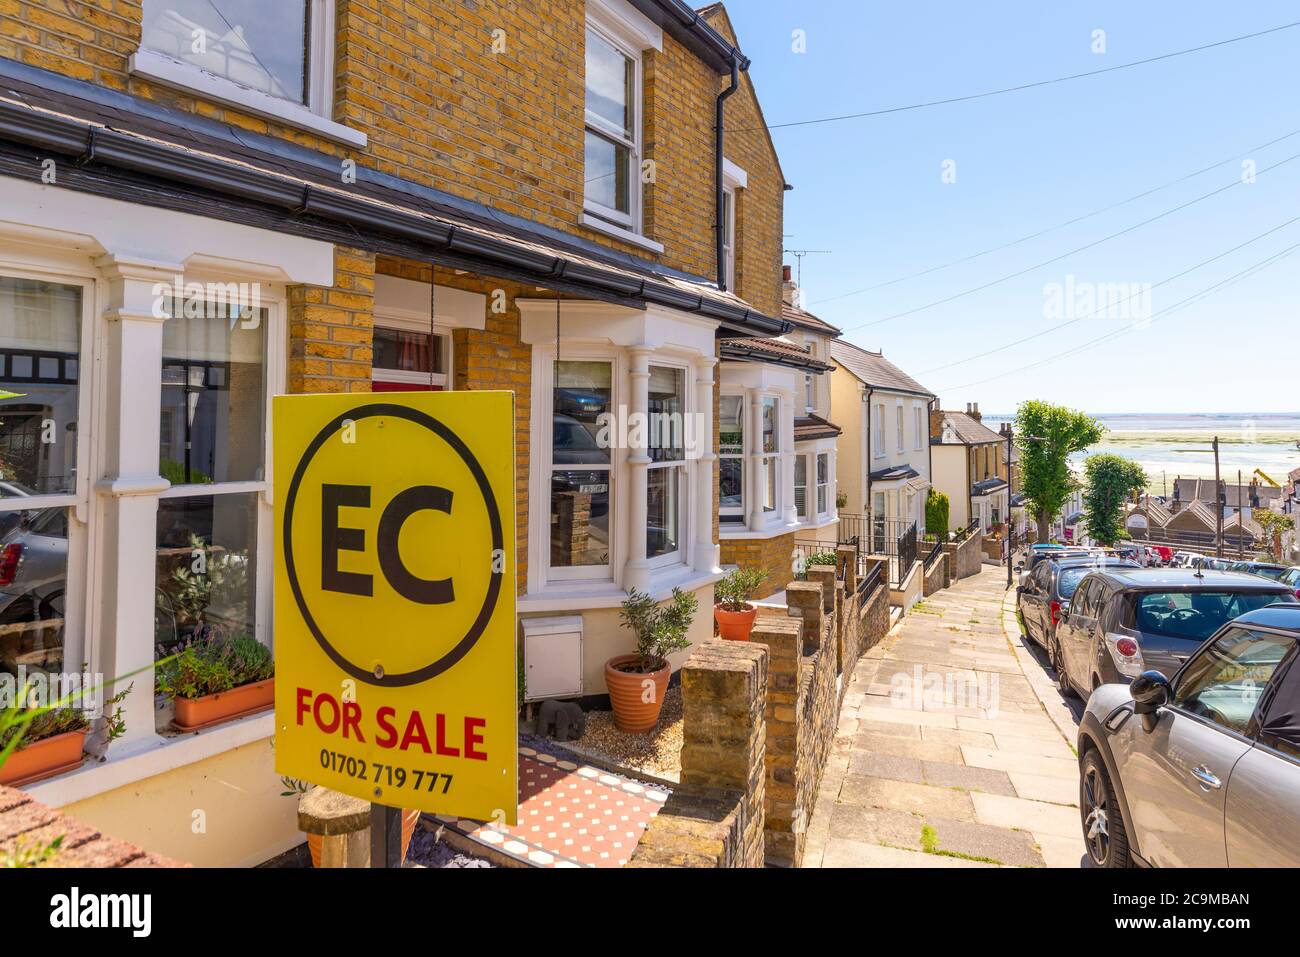 Property for sale in Leigh on Sea, Essex, UK with a view of the sea, Thames Estuary. Exclusive area. EC, Essex Countryside estate agency for sale sign Stock Photo